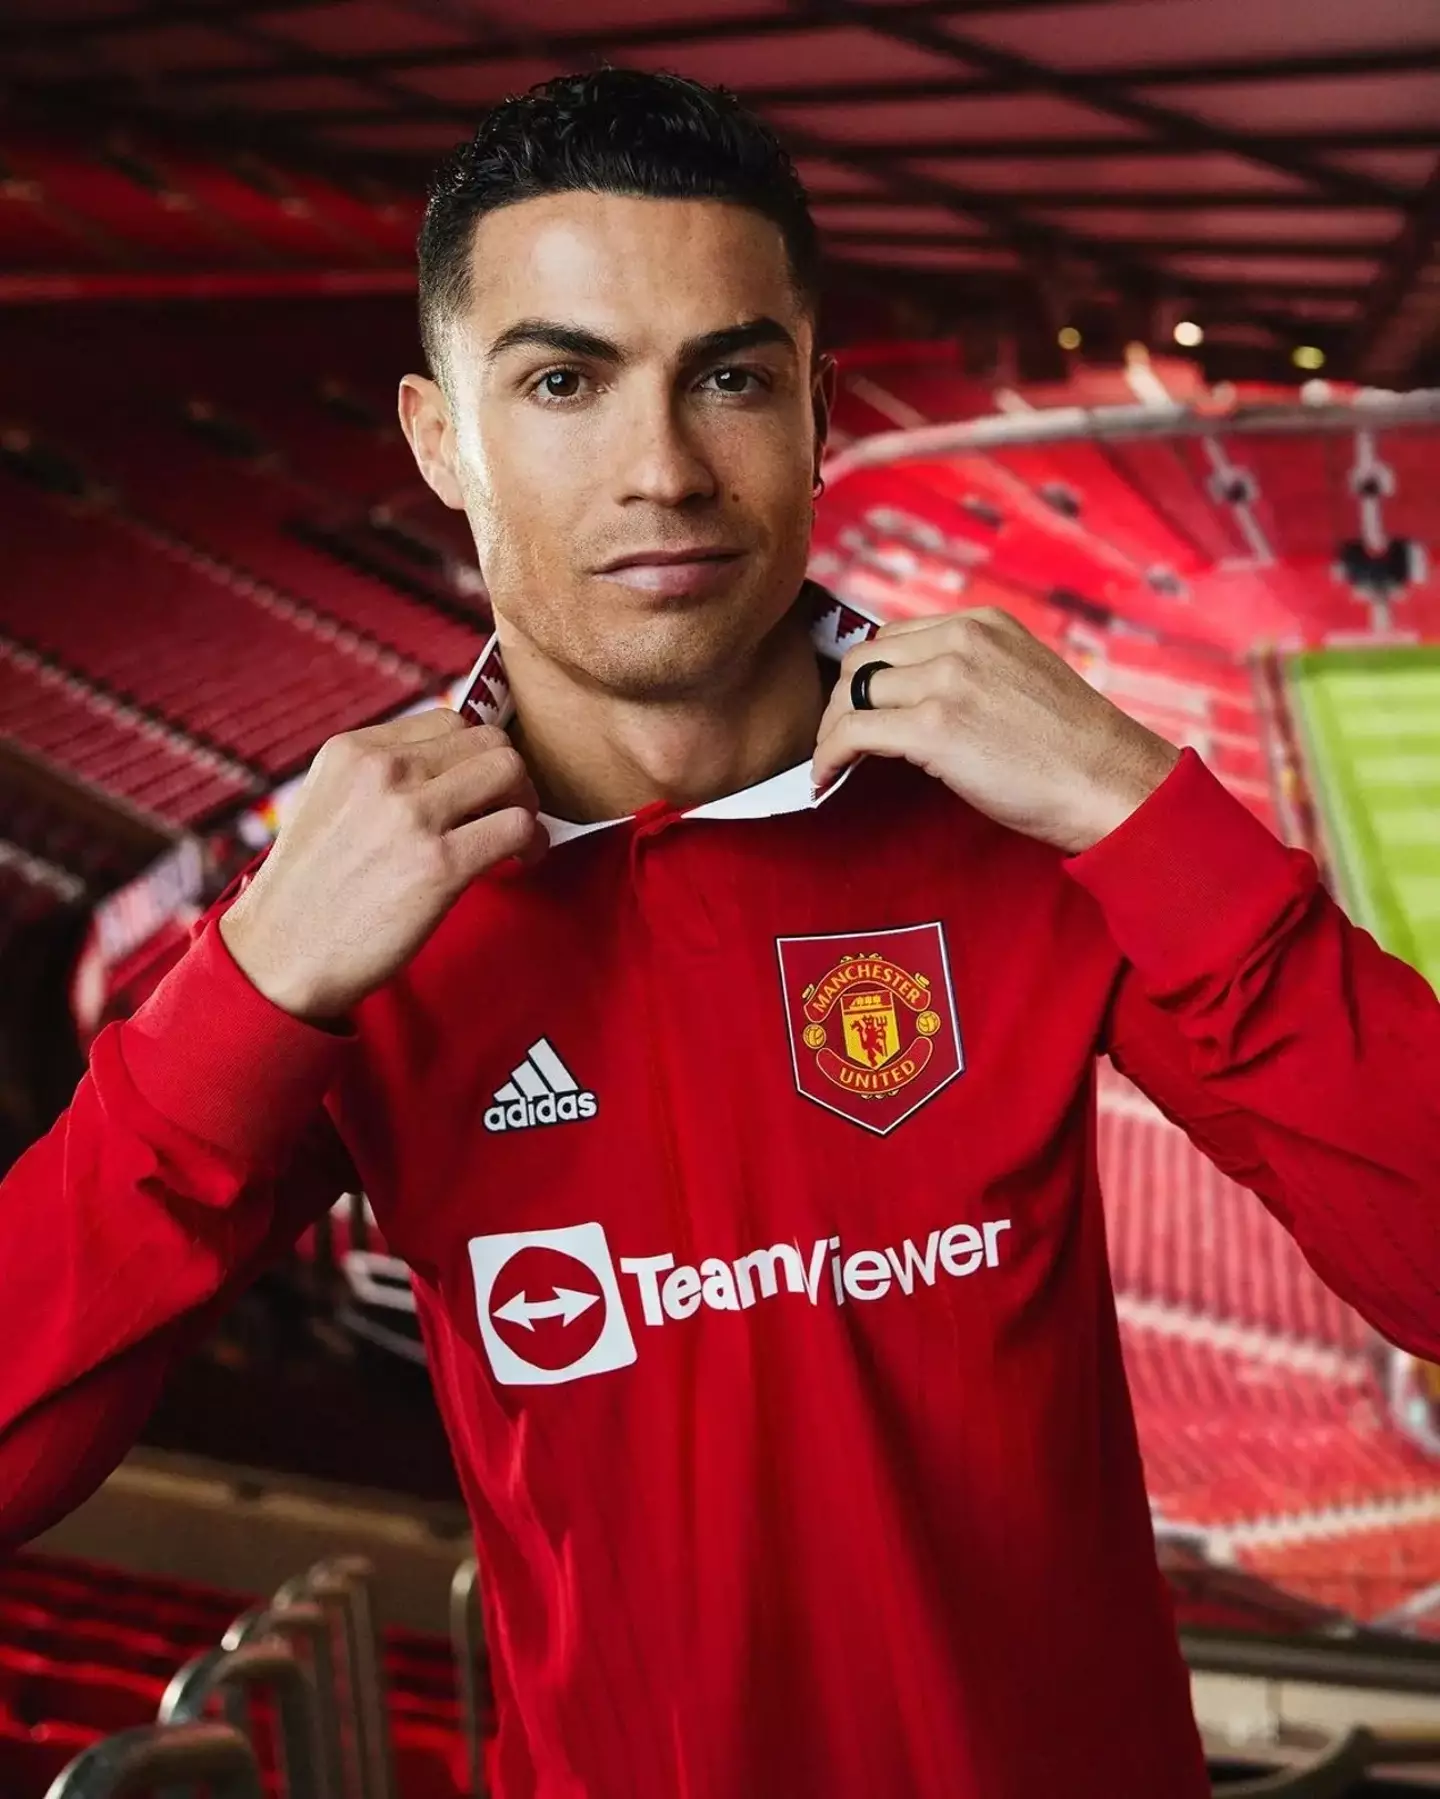 Ronaldo in the new kit, but it looks like he's trying to take it off. Image: Man United